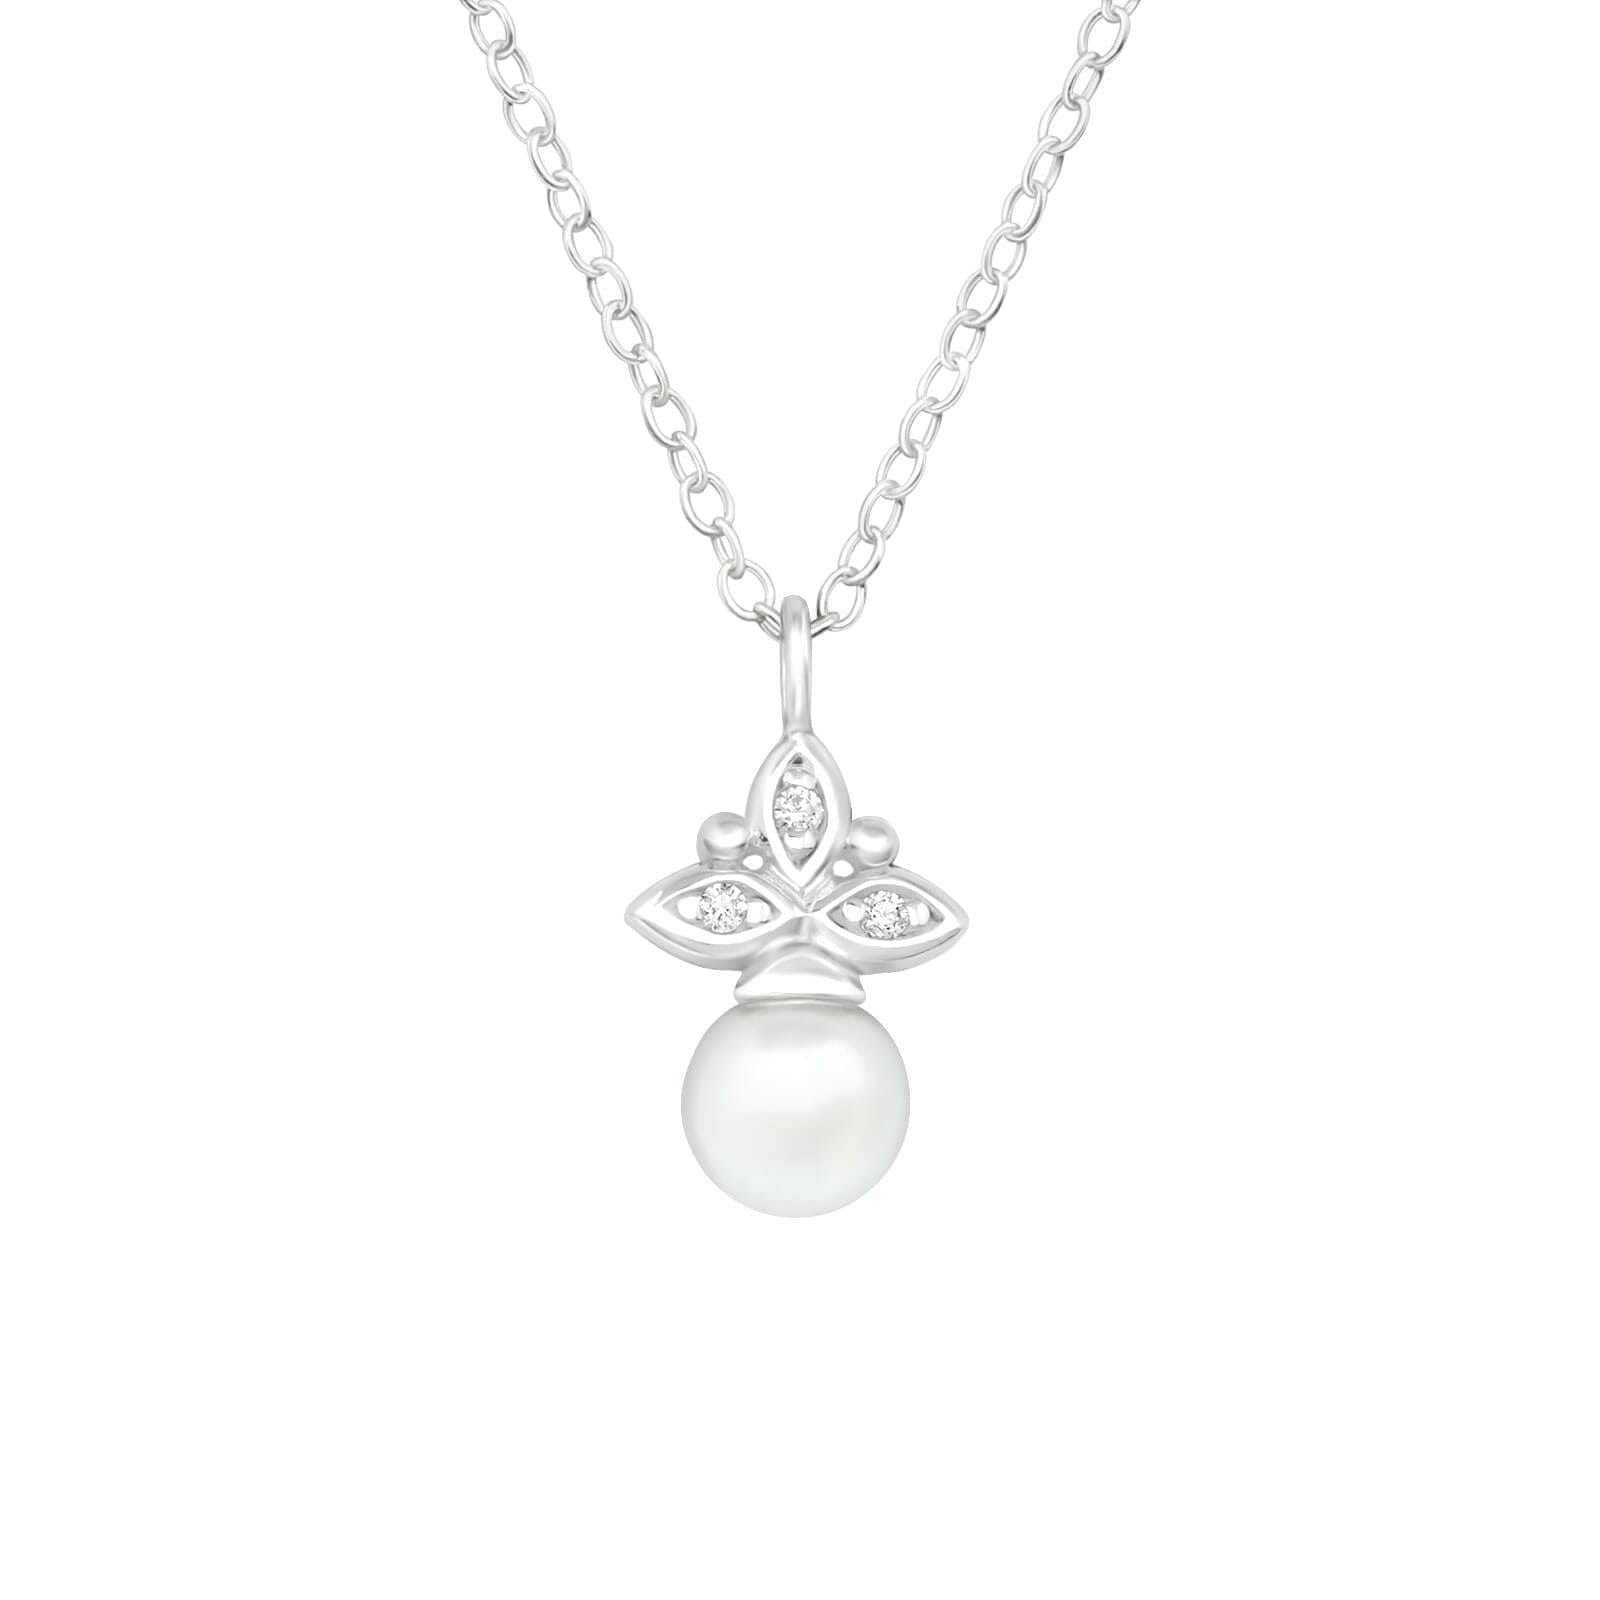 Asfour 925 Sterling Silver Necklace with Loly and Round Zicron Stone, Clear + White